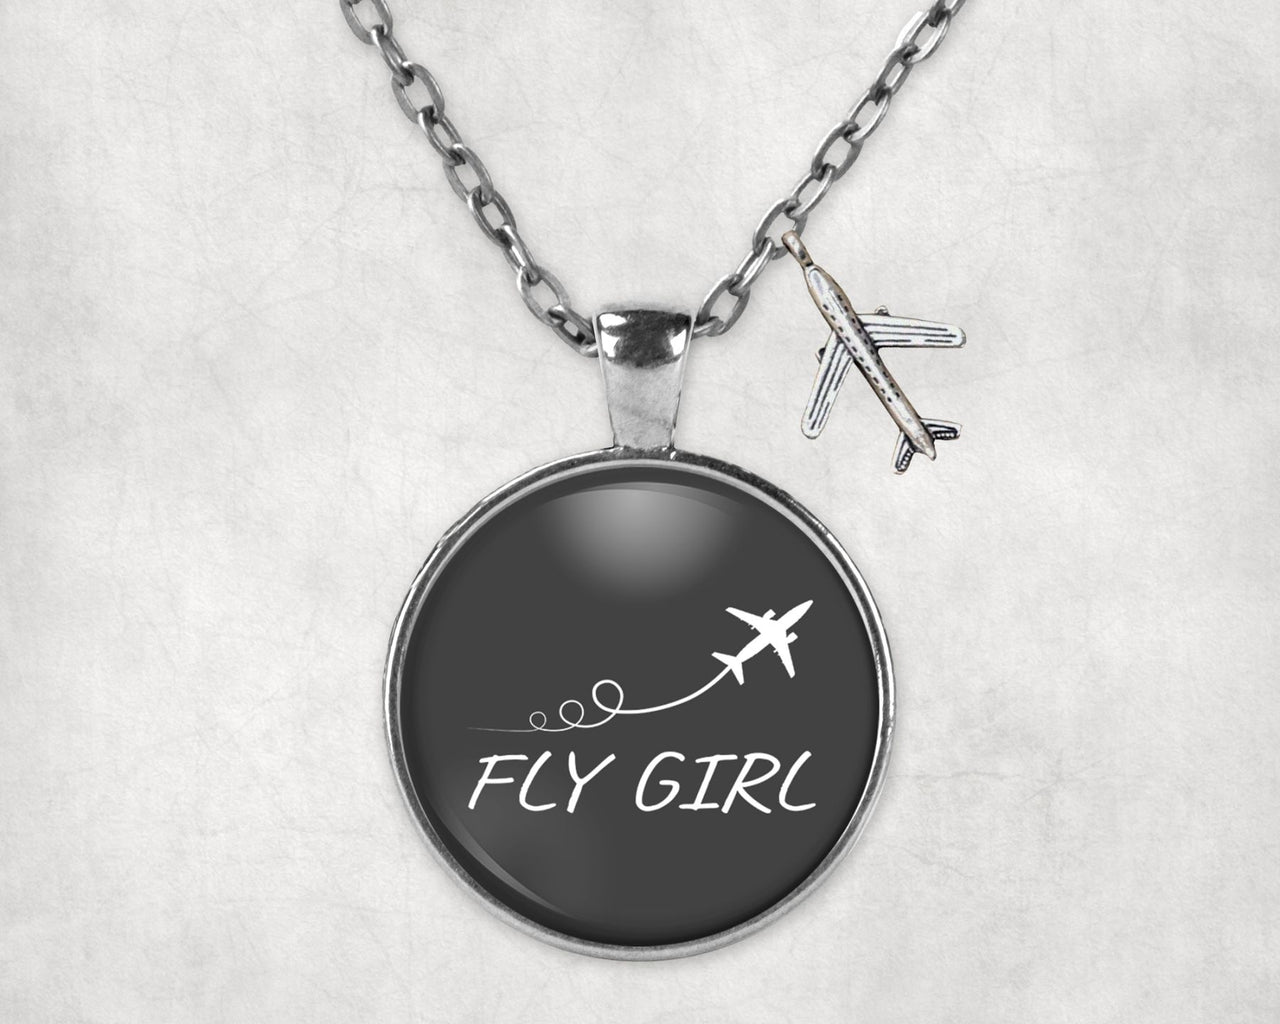 Just Fly It & Fly Girl Designed Necklaces